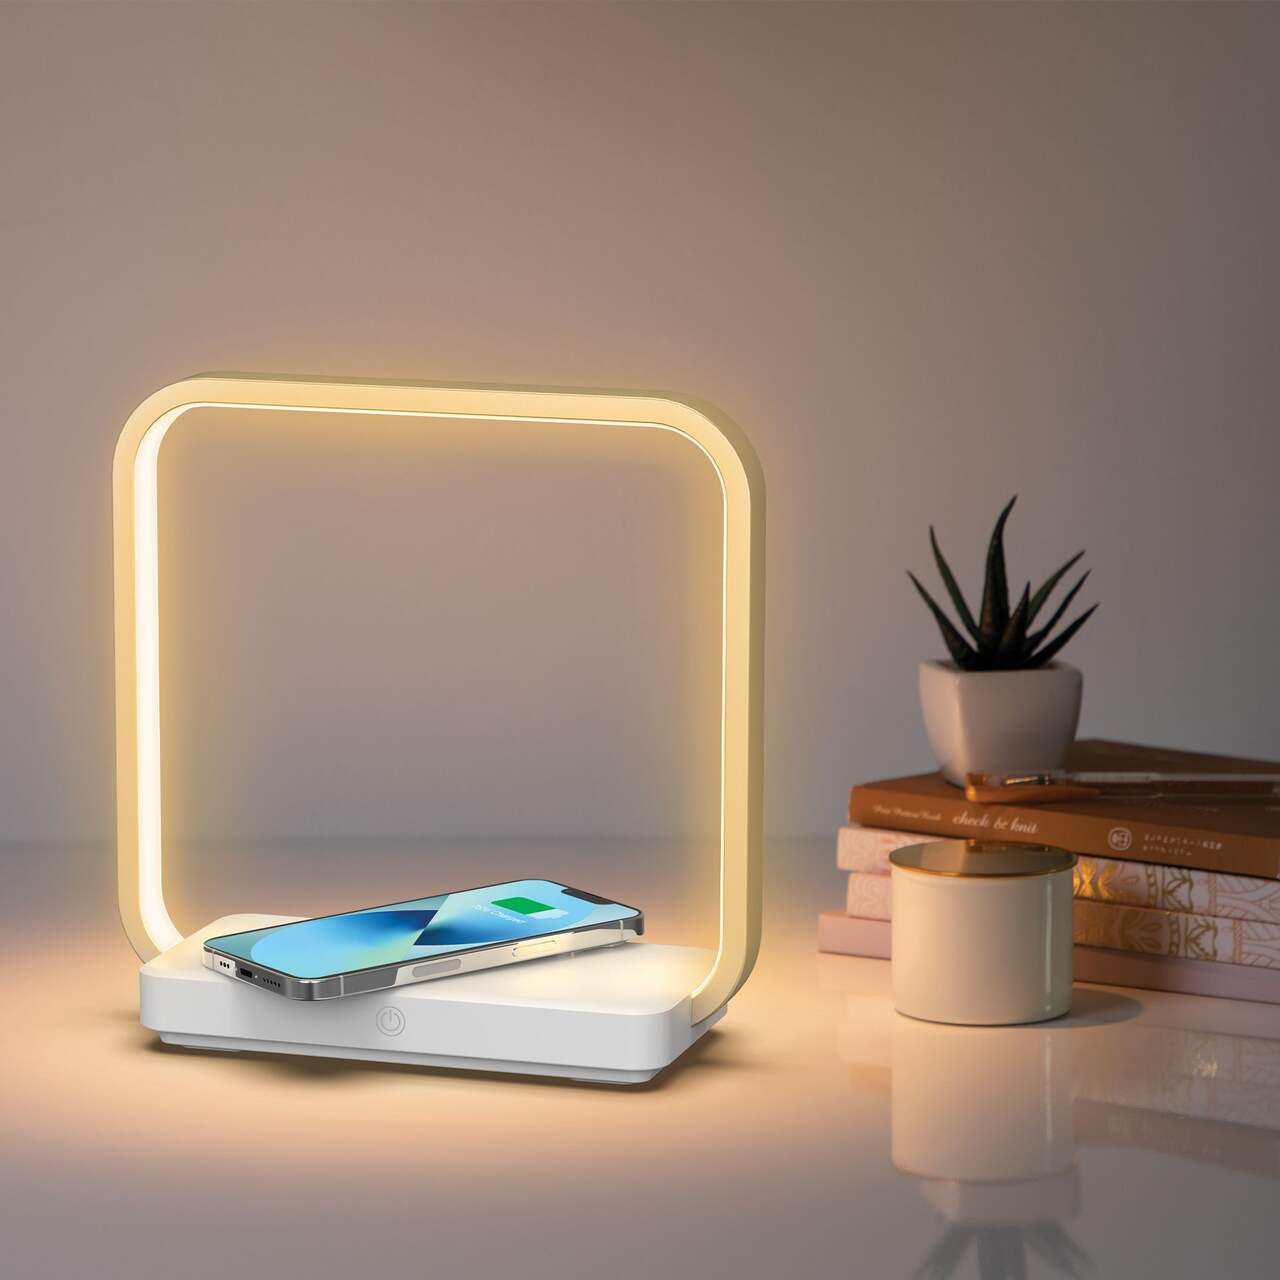 https://media-www.canadiantire.ca/product/living/home-decor/lighting/0526179/merkury-desk-lamp-wireless-charger-square-white-gold-a26fdafd-c51f-403b-9a88-ed3a29098be8-jpgrendition.jpg?imdensity=1&imwidth=640&impolicy=mZoom